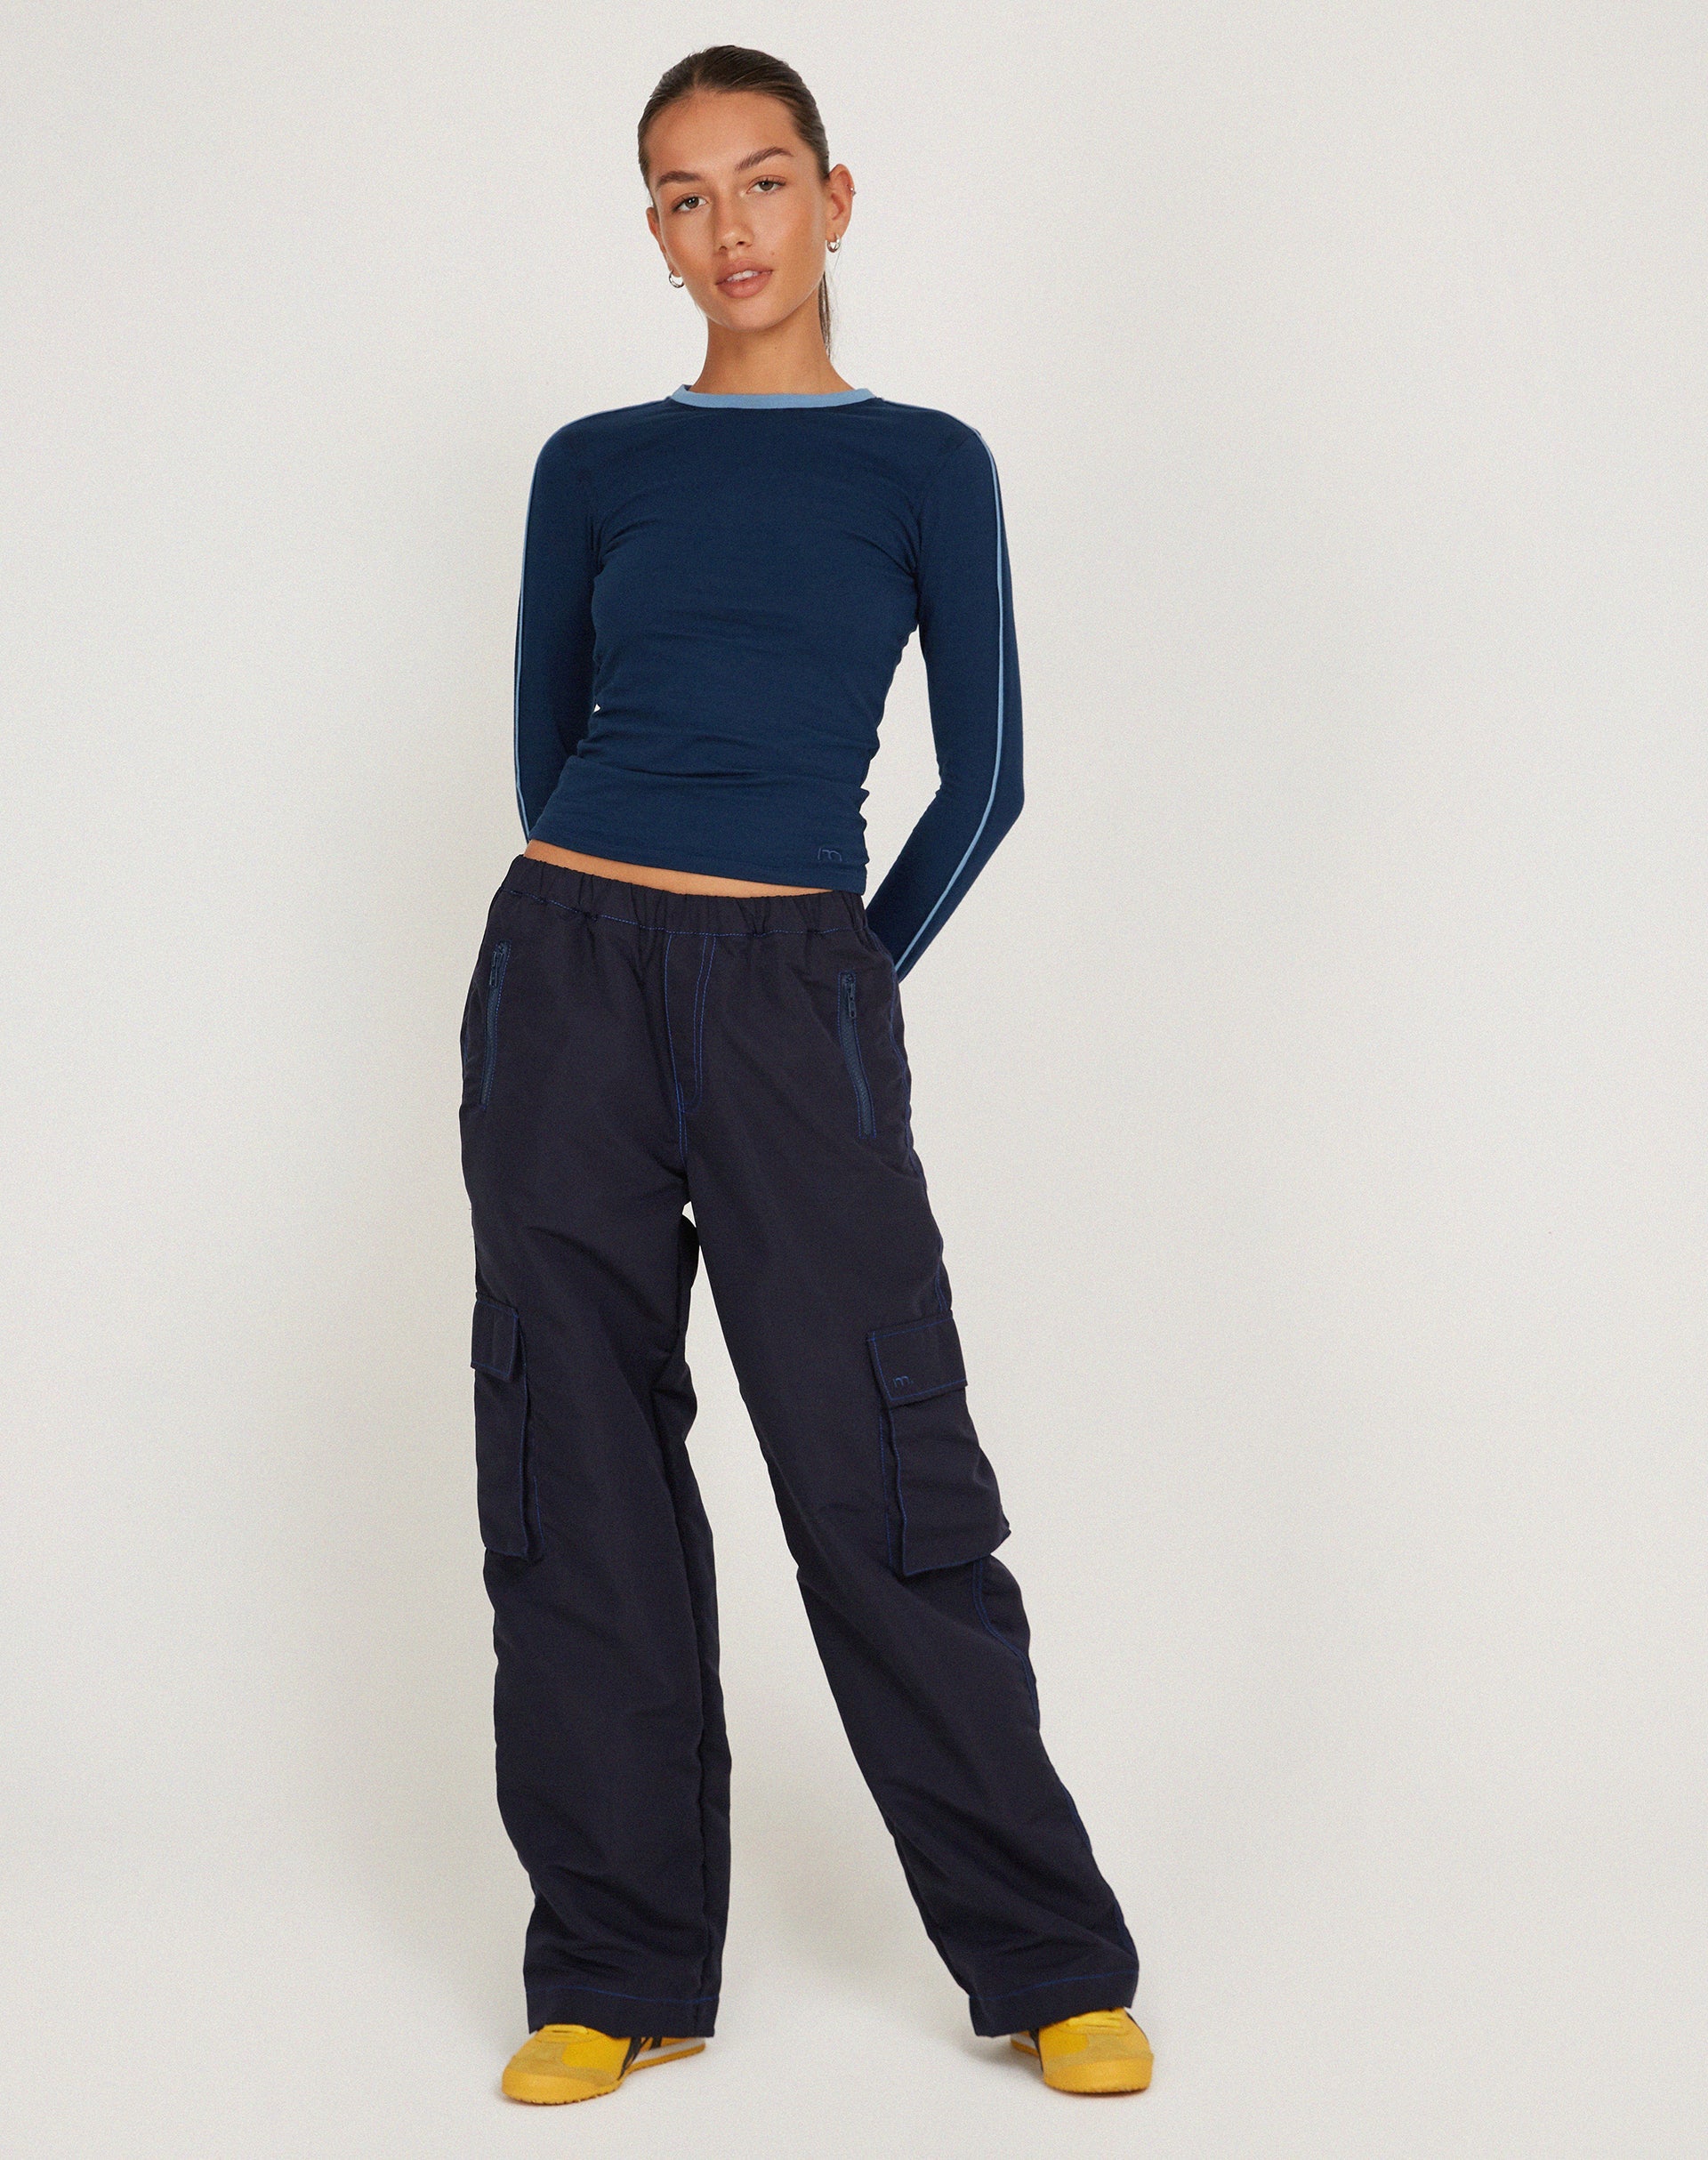 image of Oriells Cargo Trouser in Navy Top Stitch